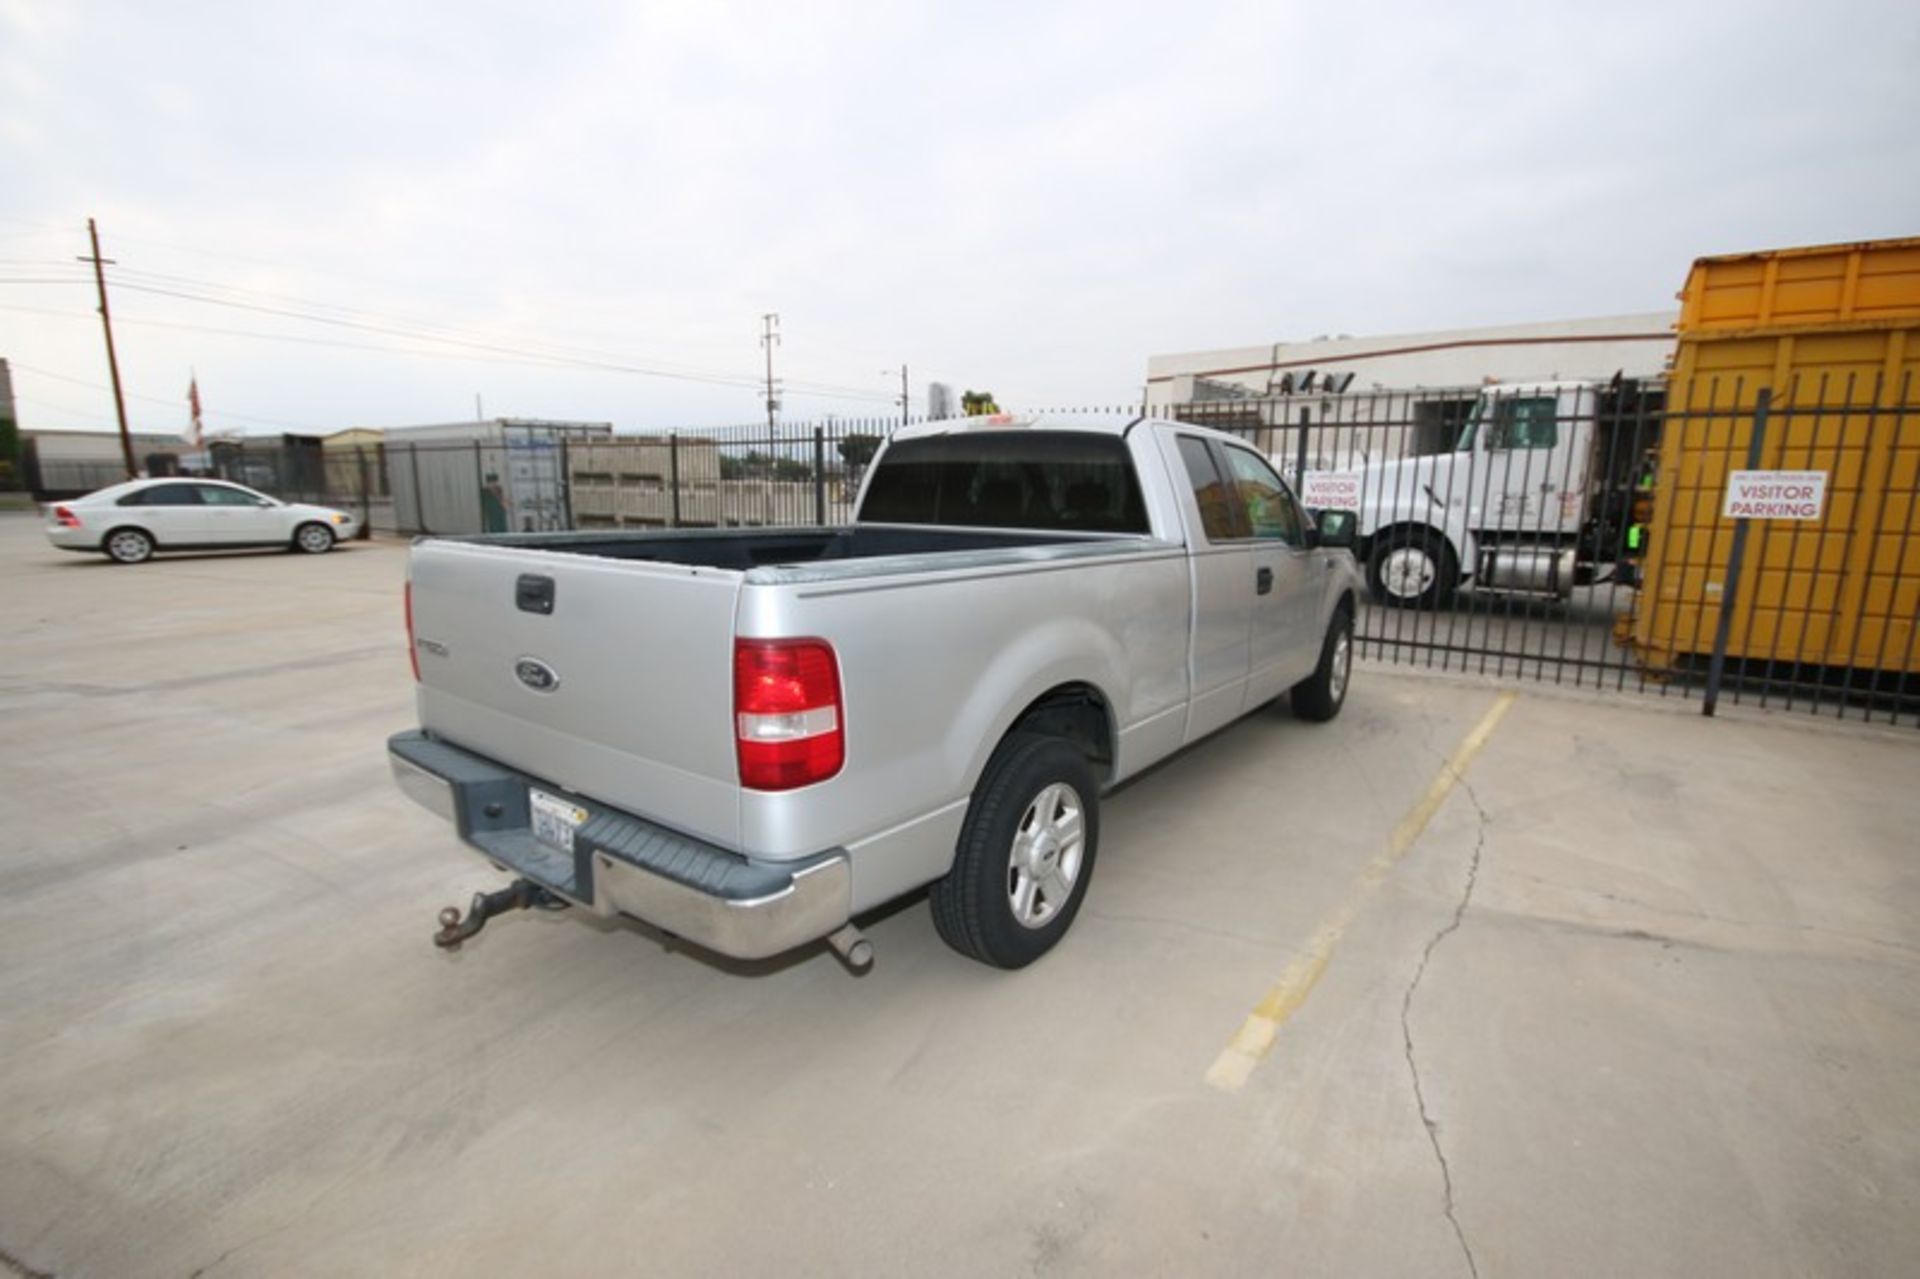 2004 Ford Silver F-150 Pick Up Truck, with Crew Cab, VIN #: 1FTRX12W74NB46219, with 6-1/2' Bed - Image 6 of 6